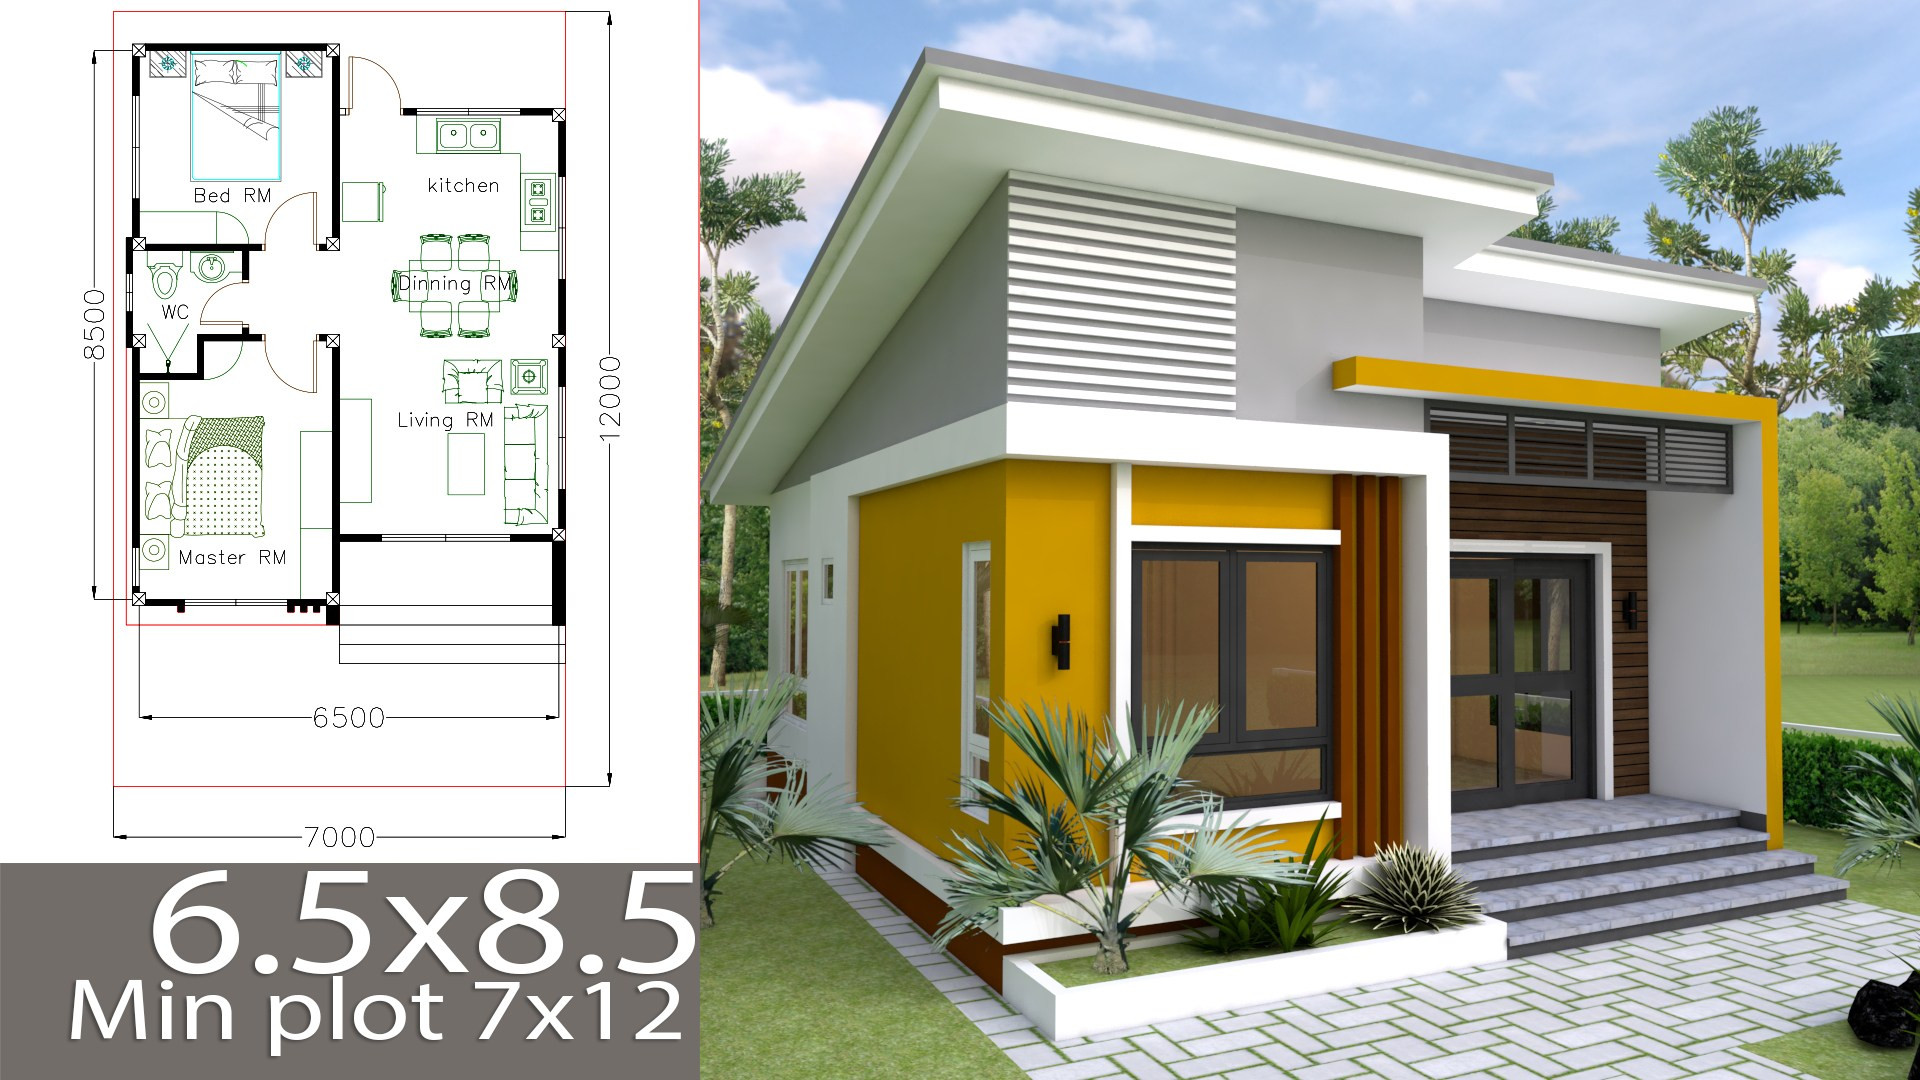 Small Bedroom Floor Plan
 Small Home design Plan 6 5x8 5m with 2 Bedrooms Samphoas